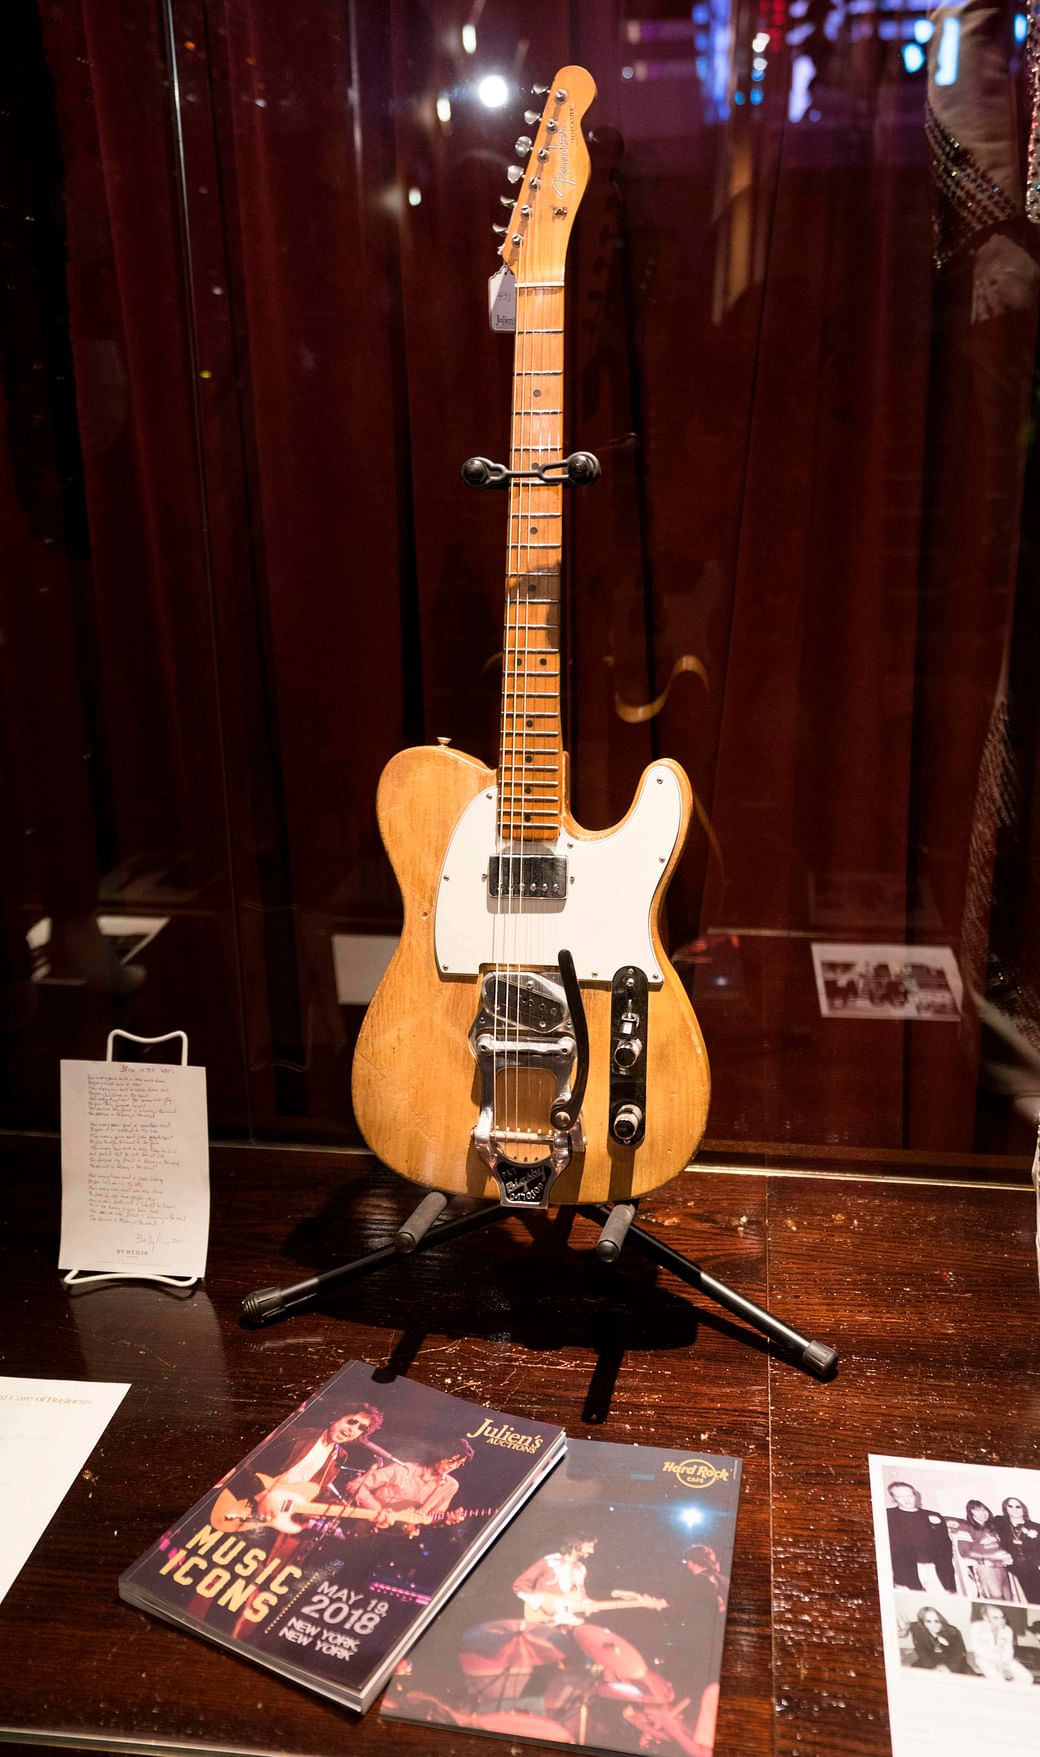 Bob Dylan guitar fetches $495,000 at auction